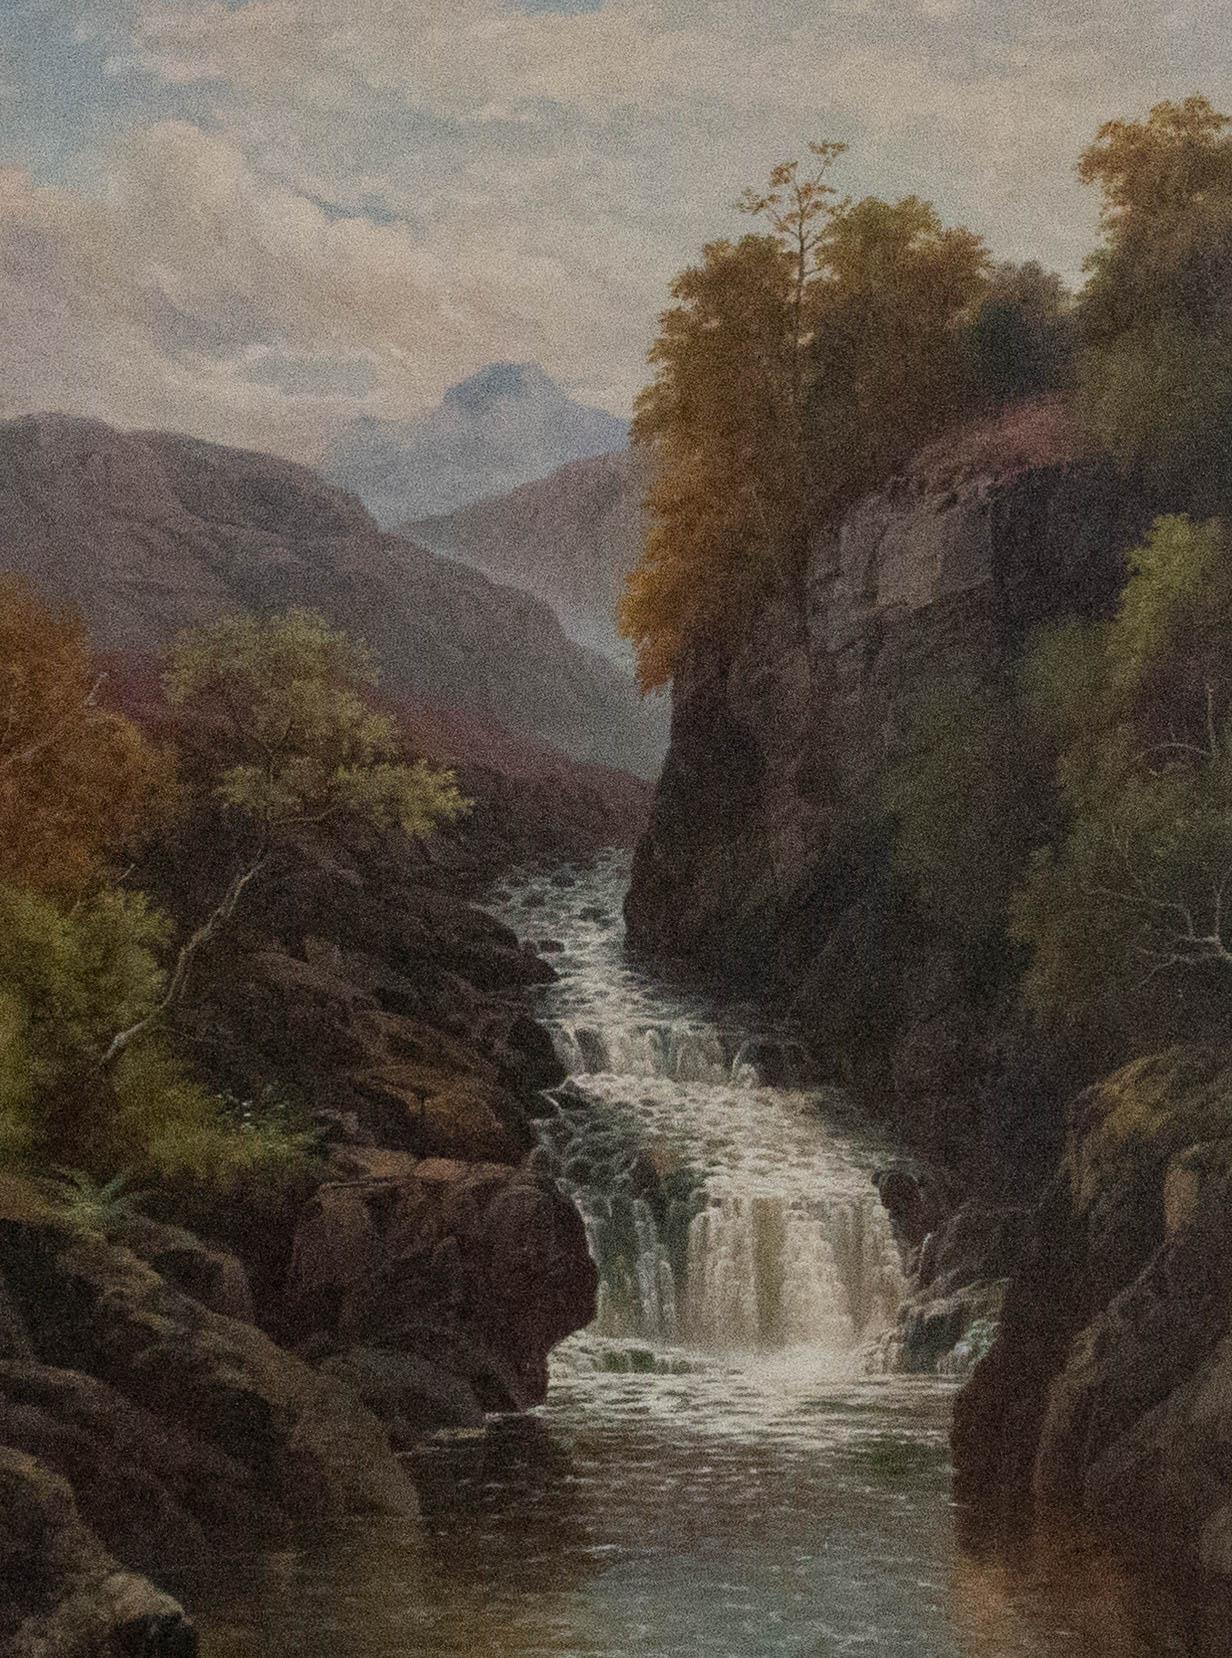 A truly impressive late 19th Century (c.1870) Welsh landscape in oil This painting, in remarkable condition and of impressive size, shows a a rocky, stepped waterfall on the River Llugwy in Snowdonia. The rocky banks and cliffs around the river are